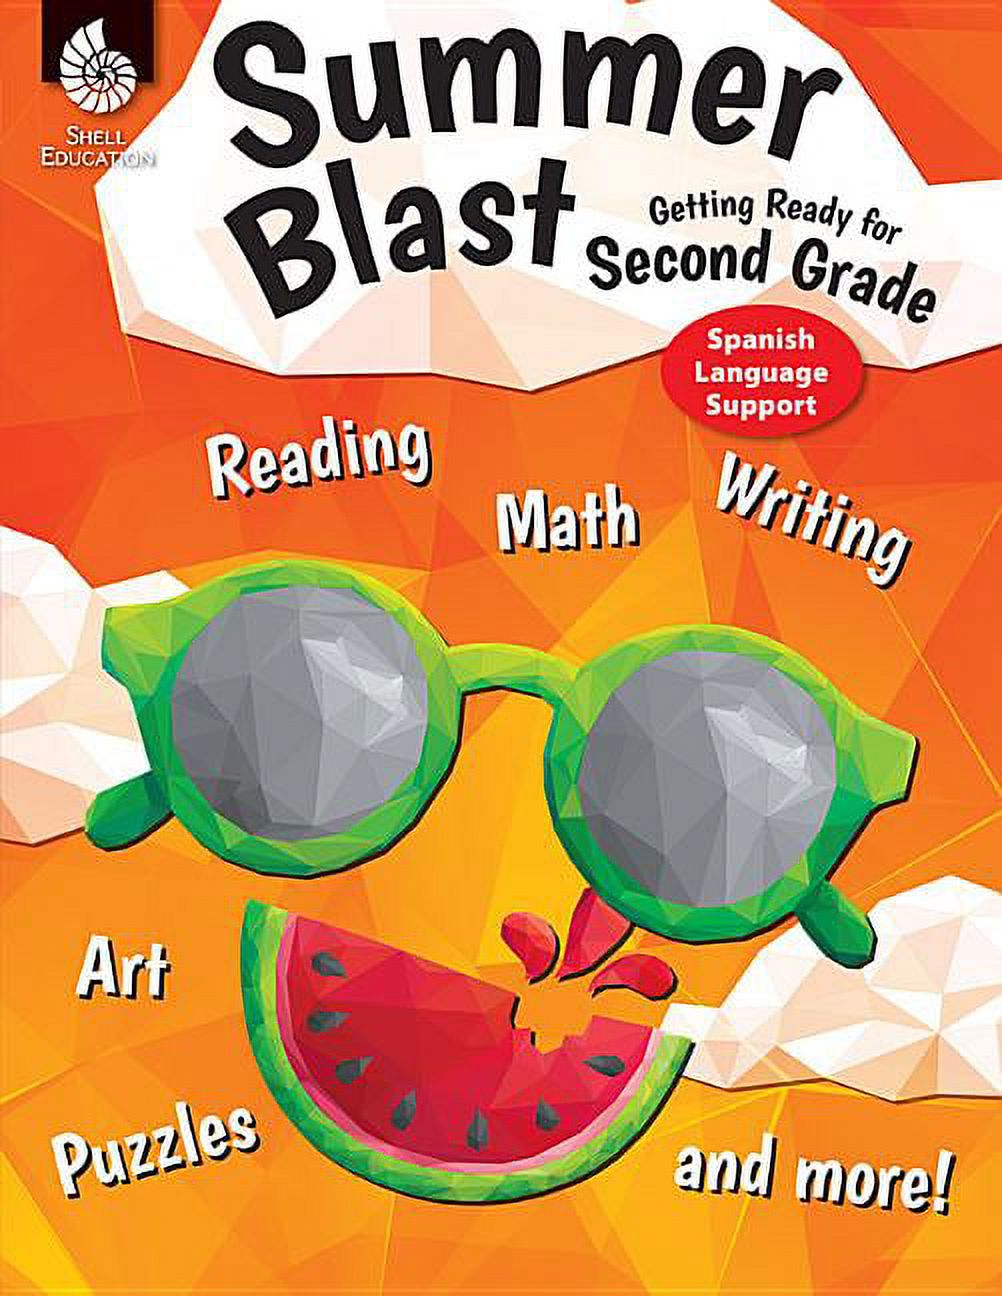 Summer Blast: Summer Blast: Getting Ready for Second Grade (Spanish Language Support) (Paperback) - image 1 of 1